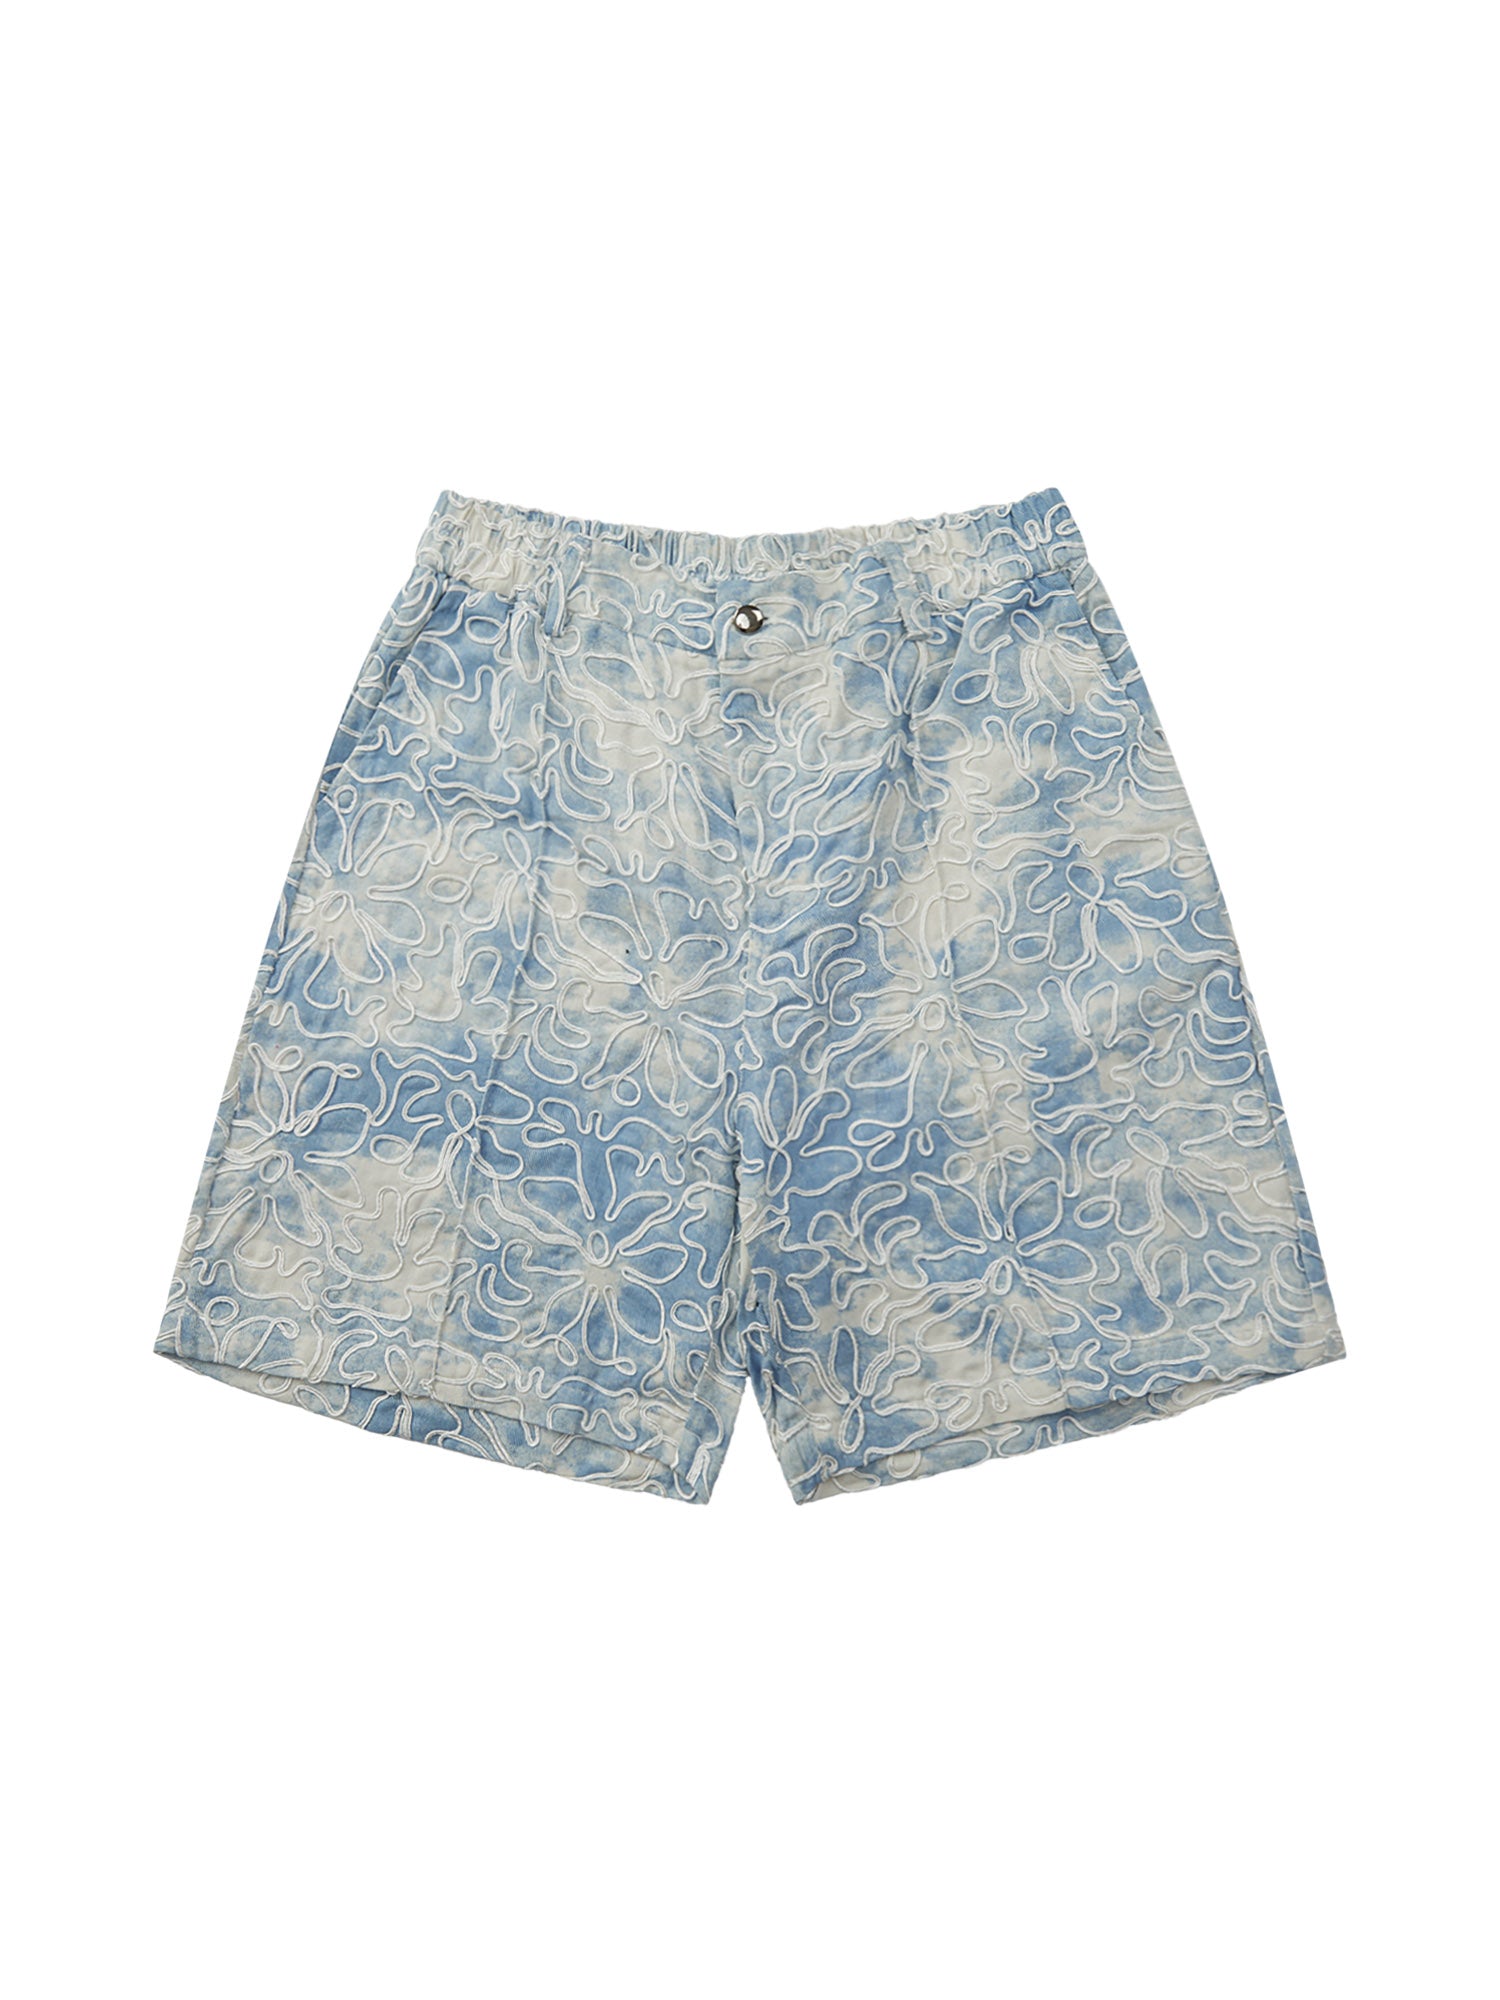 Thesupermade Ink Tie-dye Embroidered Floral Hip-Hop Shorts